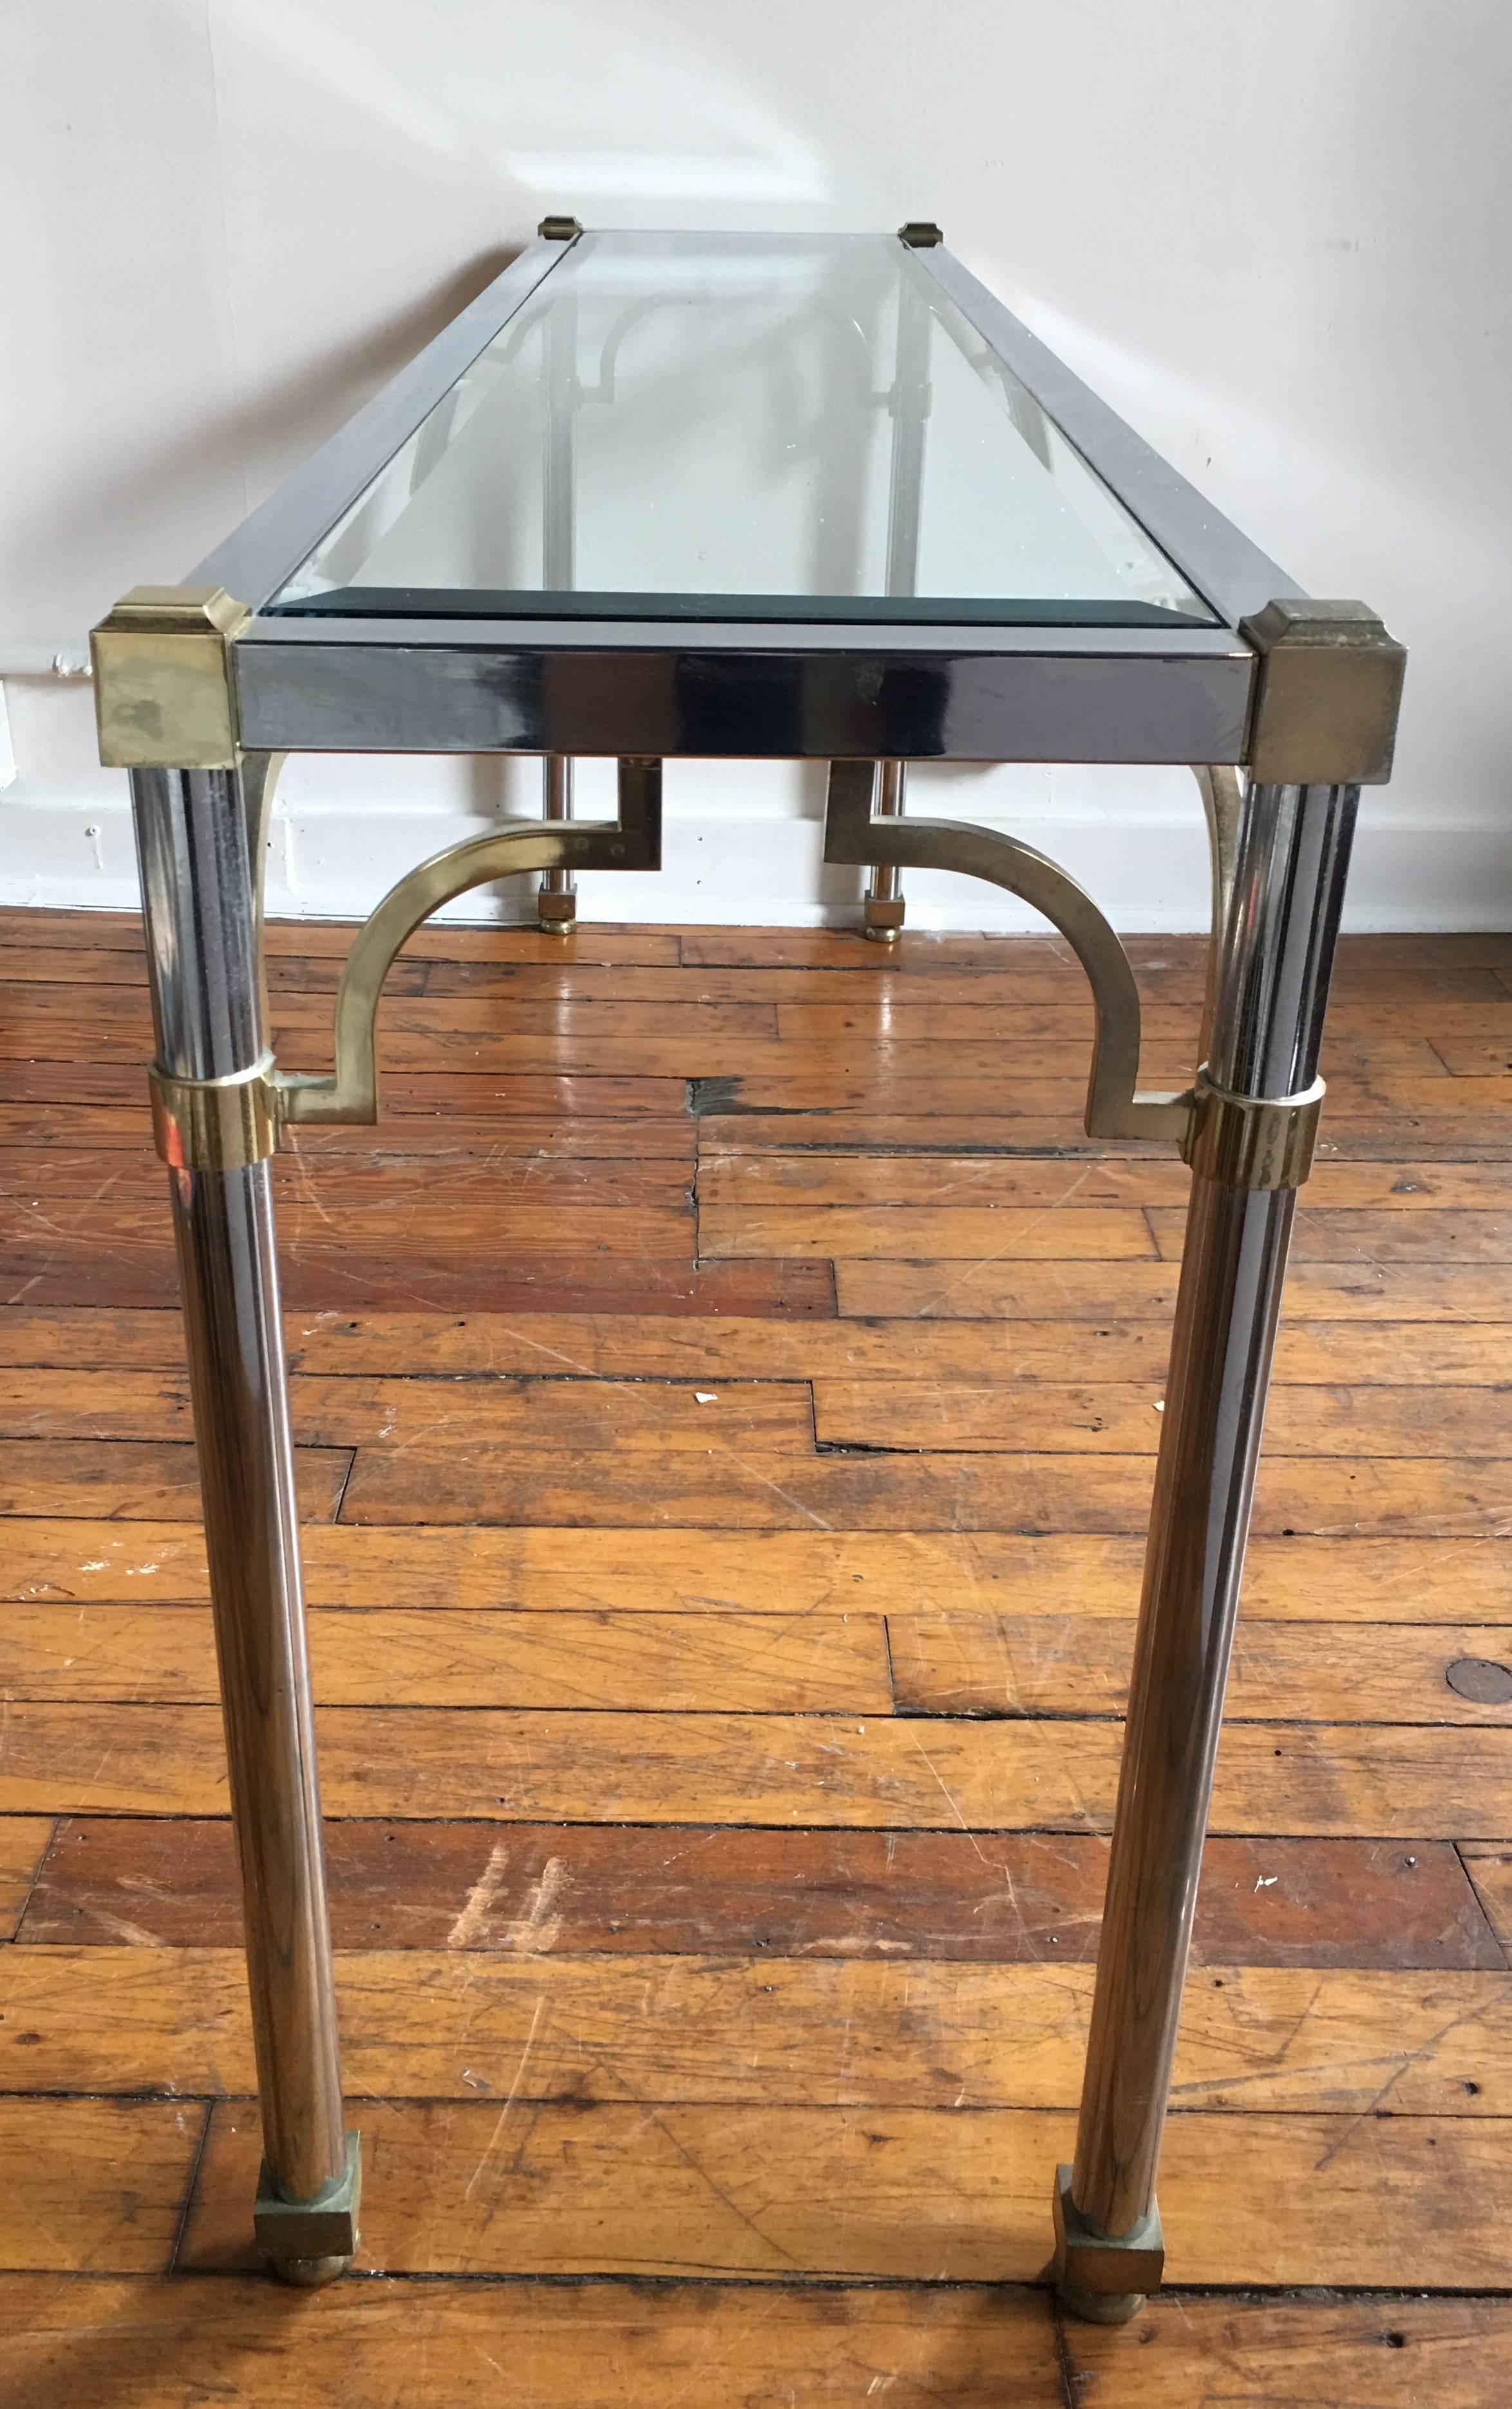 Mid-Century Modern mixed metal brass and chromed steel console sofa table in the style of John Vesey and Maison Jansen. Removable clear beveled glass top. Coordinating coffee table also available for purchase.